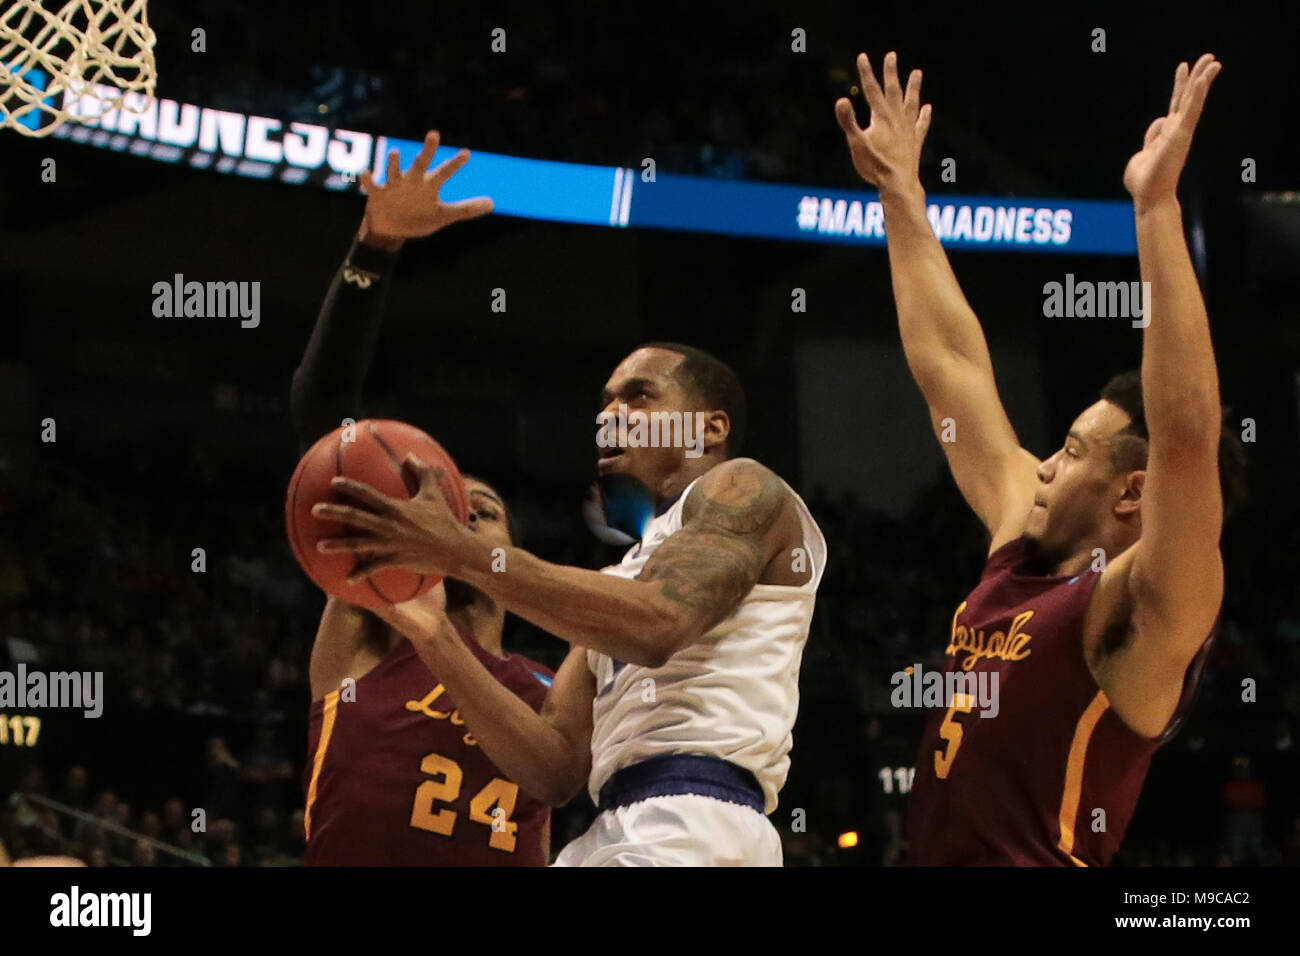 ATLANTA - MAR 24: Kansas State Wildcats guard Barry Brown Jr. (5) goes up for a shot as Loyola-Chicago Ramblers guard Marques Townes (5) and forward Aundrew Jackson (24) defend during the Elite 8 game at Philips Arena on March 24, 2018 in Atlanta, Georgia. Loyola-Chicago won 78-62 to advance to the Final Four. Stock Photo